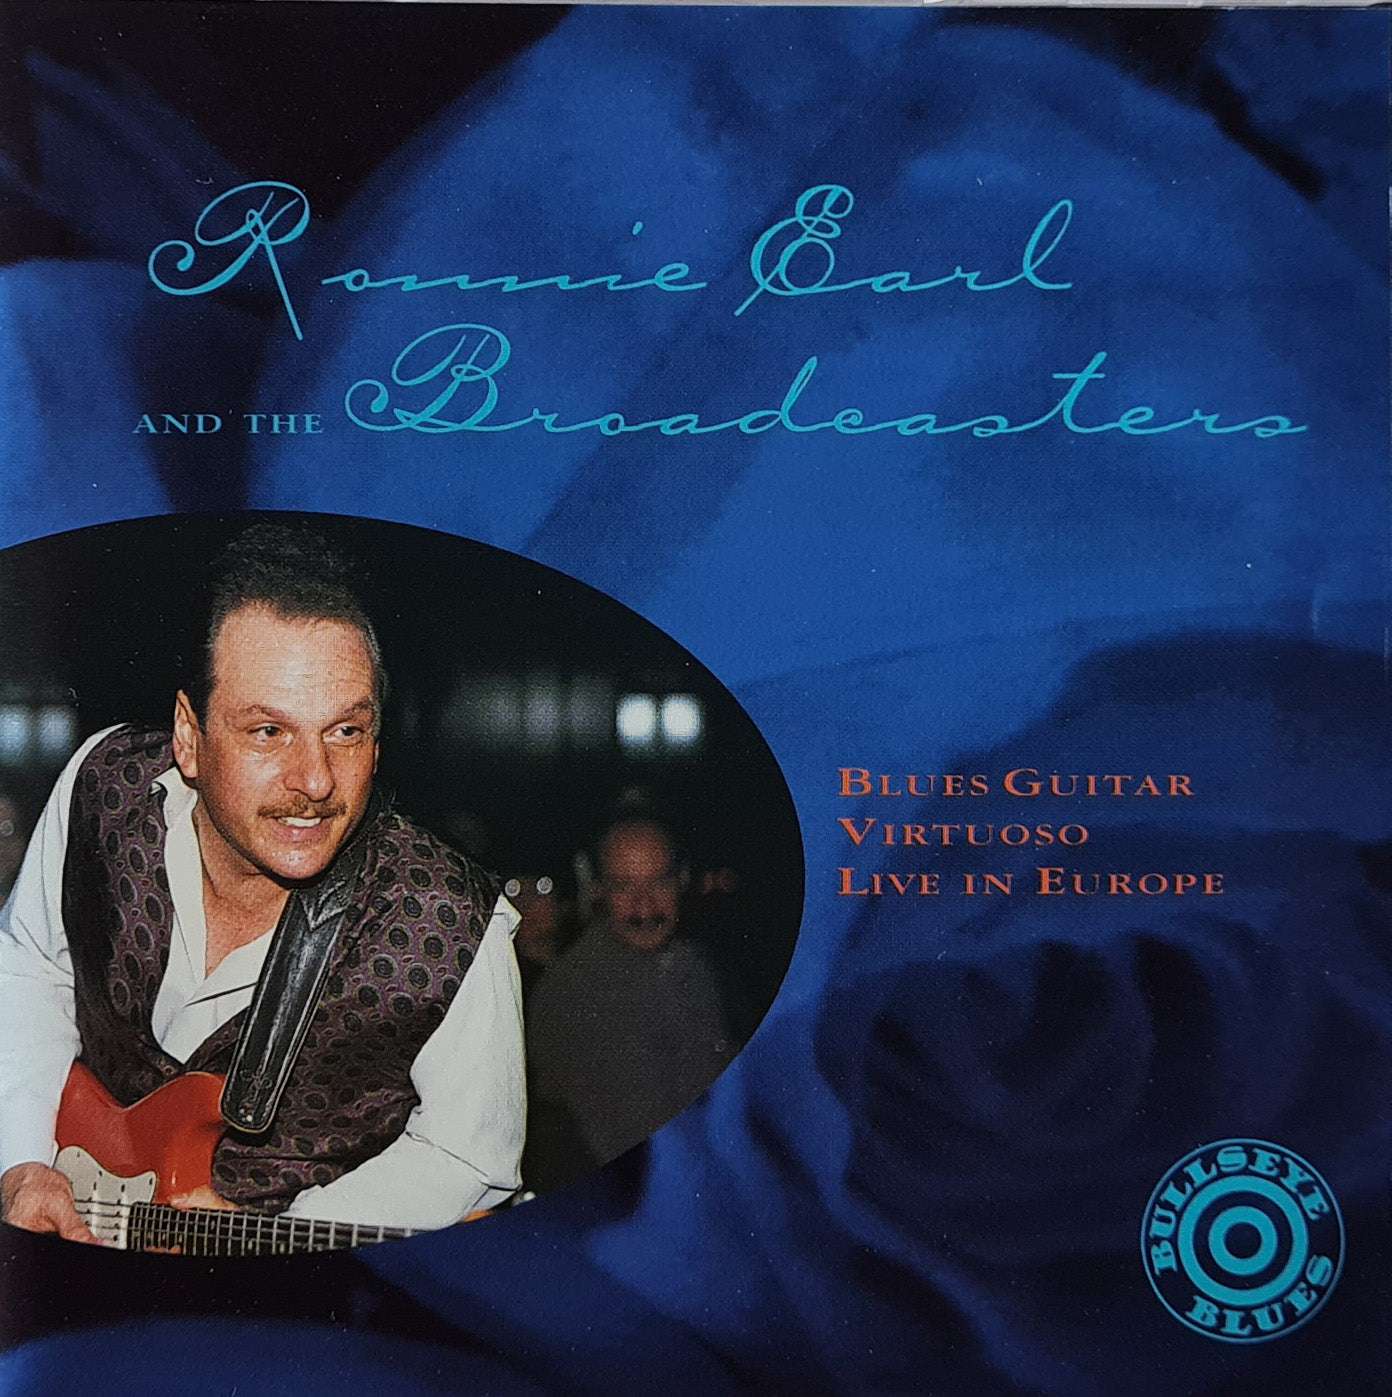 Ronnie Earl and the Broadcasters - Blues Guitar Virtuoso Live in Europe (CD)